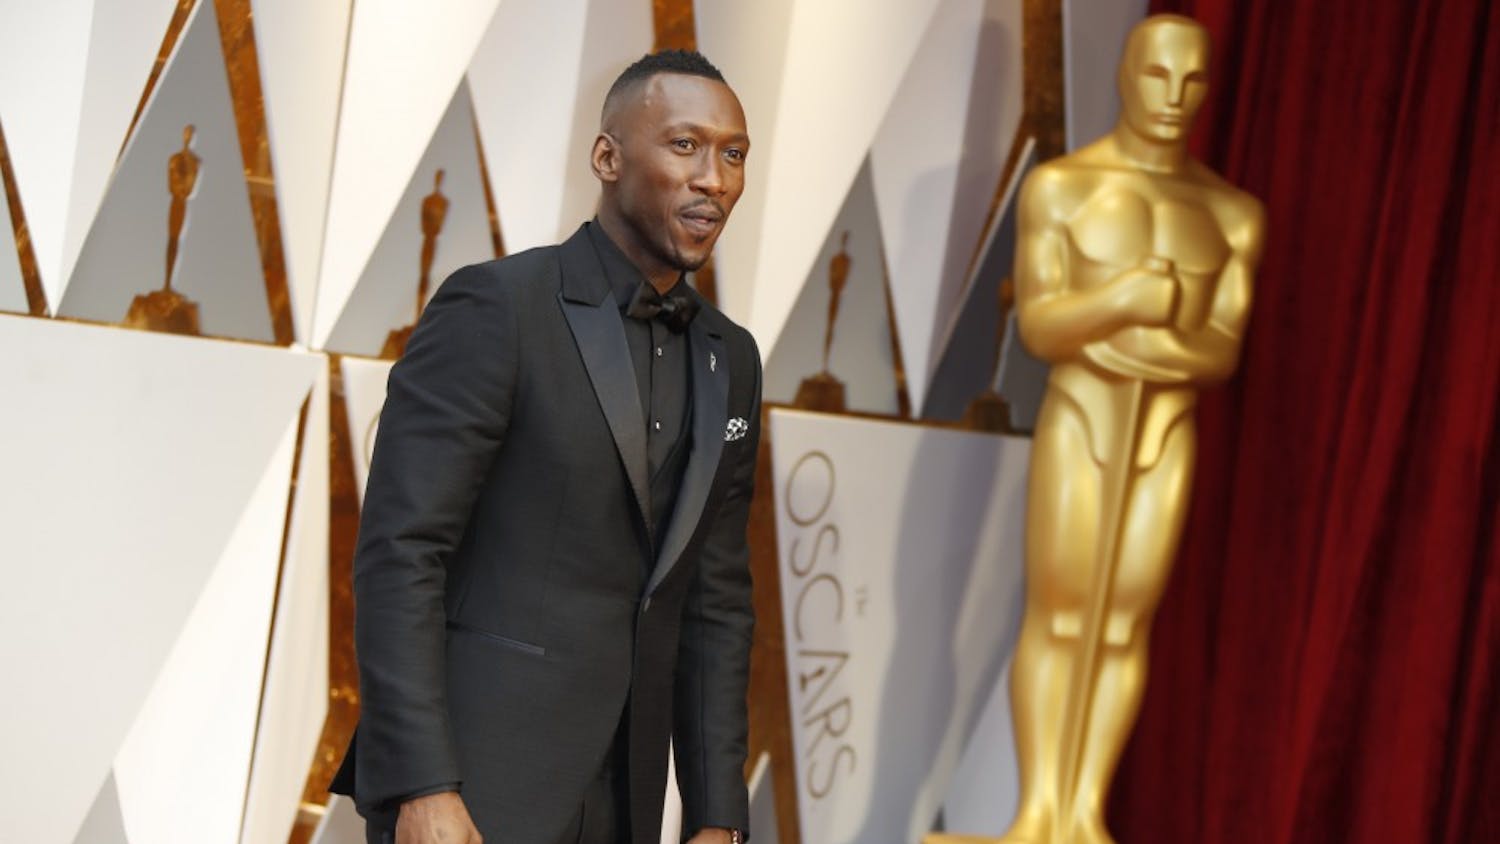 Mahershala Ali arrives at the 89th Academy Awards on Sunday, Feb. 26, 2017, at the Dolby Theatre at Hollywood & Highland Center in Hollywood. (Jay L. Clendenin/Los Angeles Times/TNS)